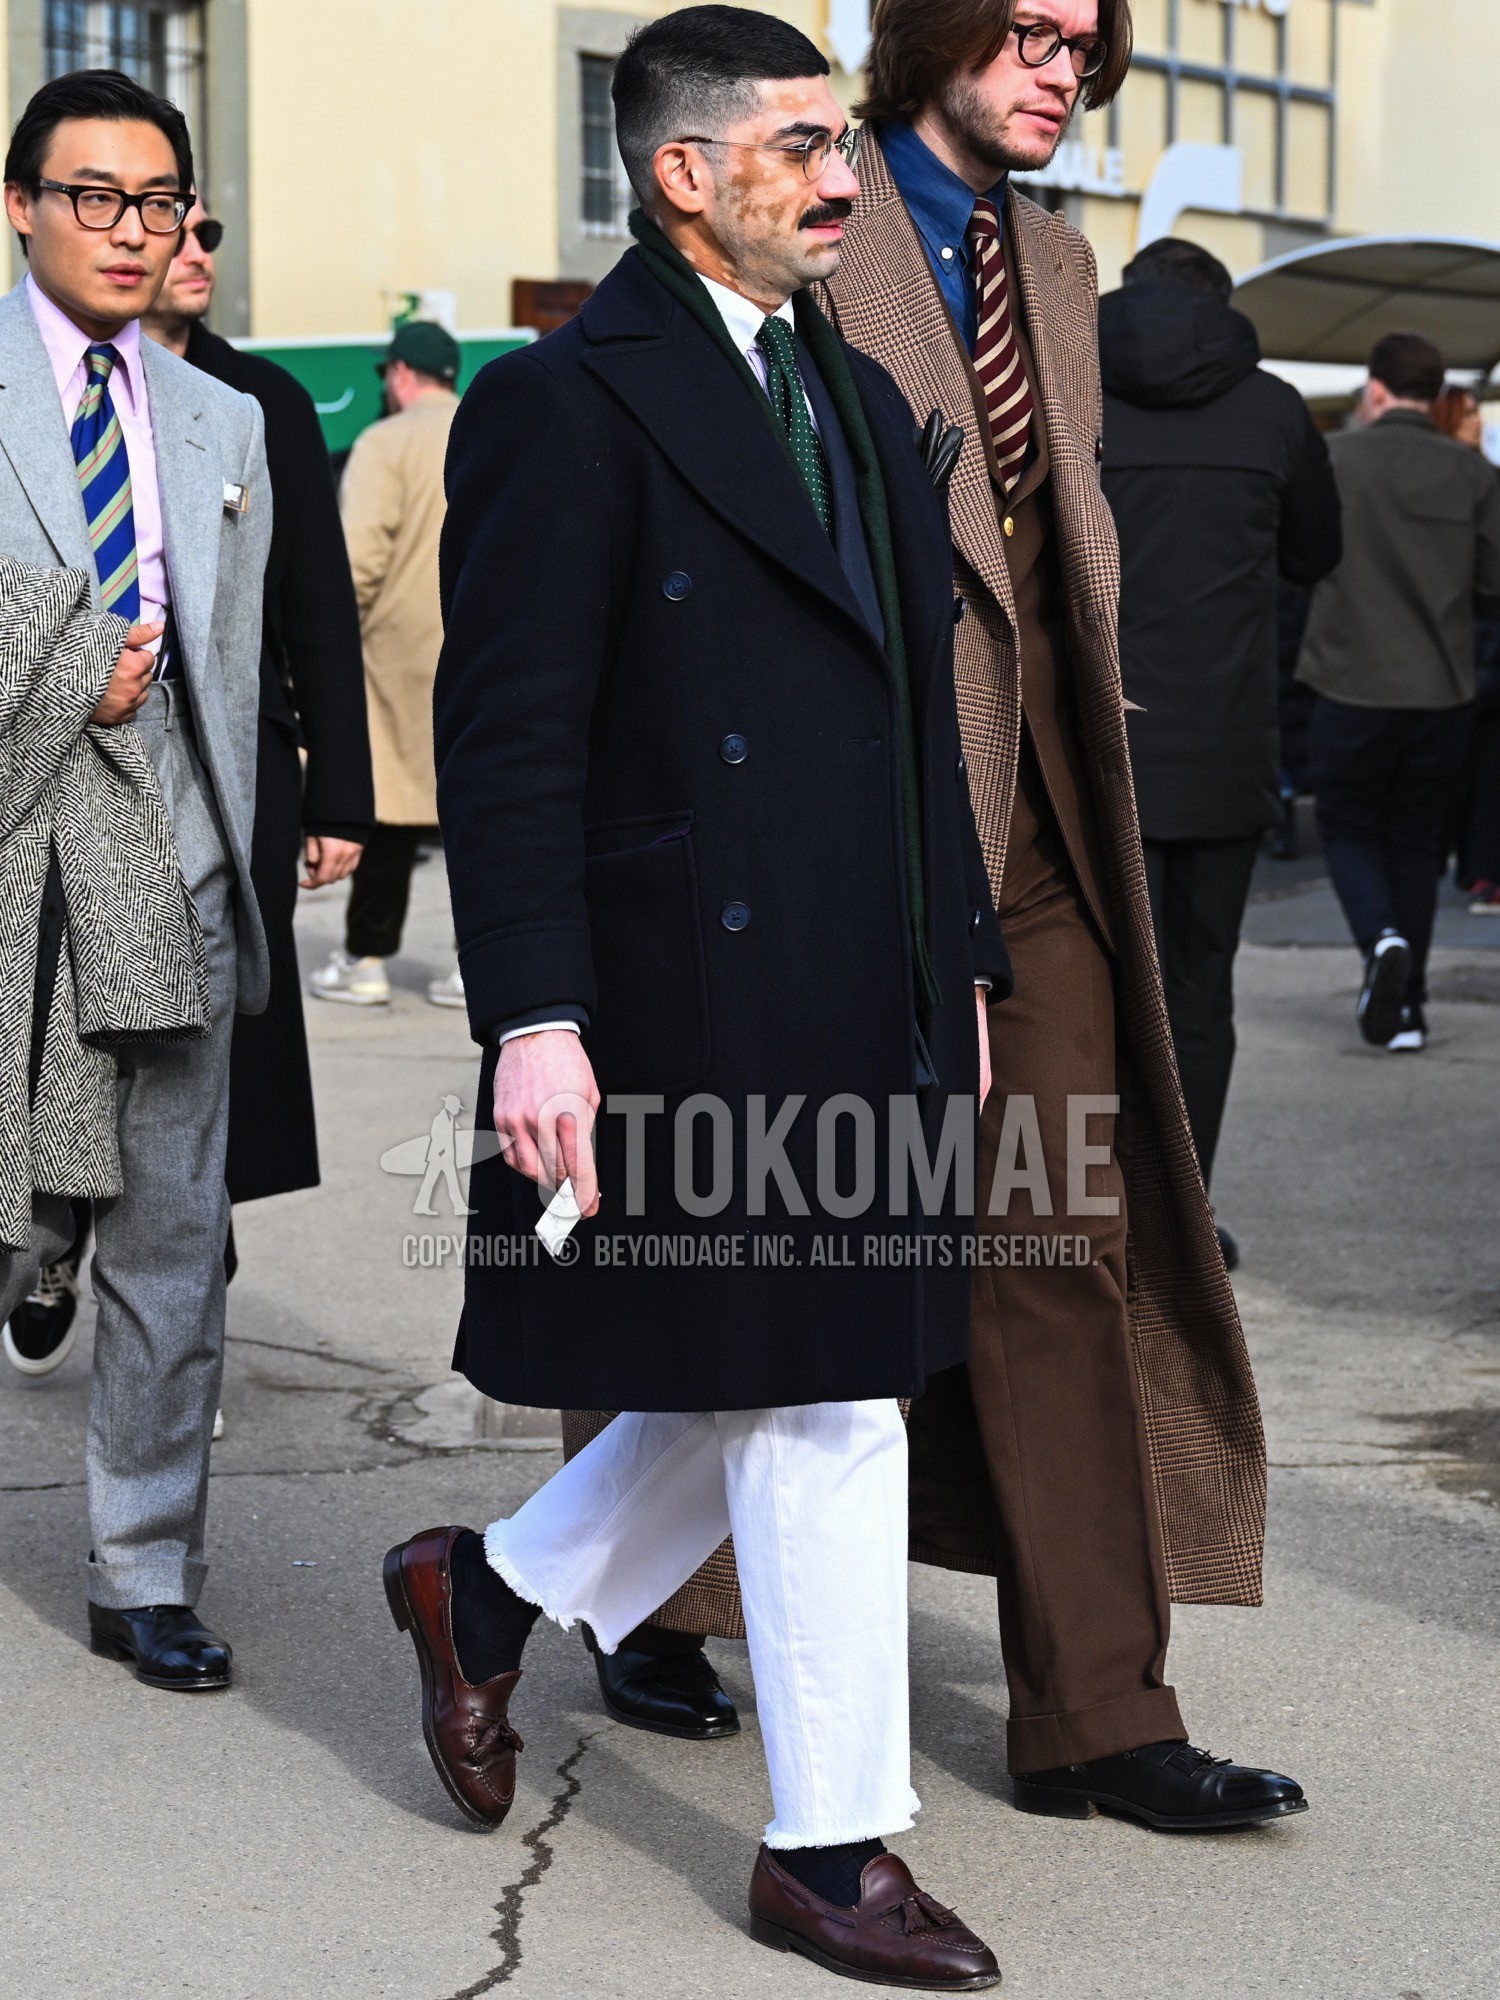 Men's autumn winter outfit with silver plain glasses, green plain scarf, navy plain chester coat, white plain shirt, navy plain tailored jacket, white plain denim/jeans, navy plain socks, brown tassel loafers leather shoes, green dots necktie.